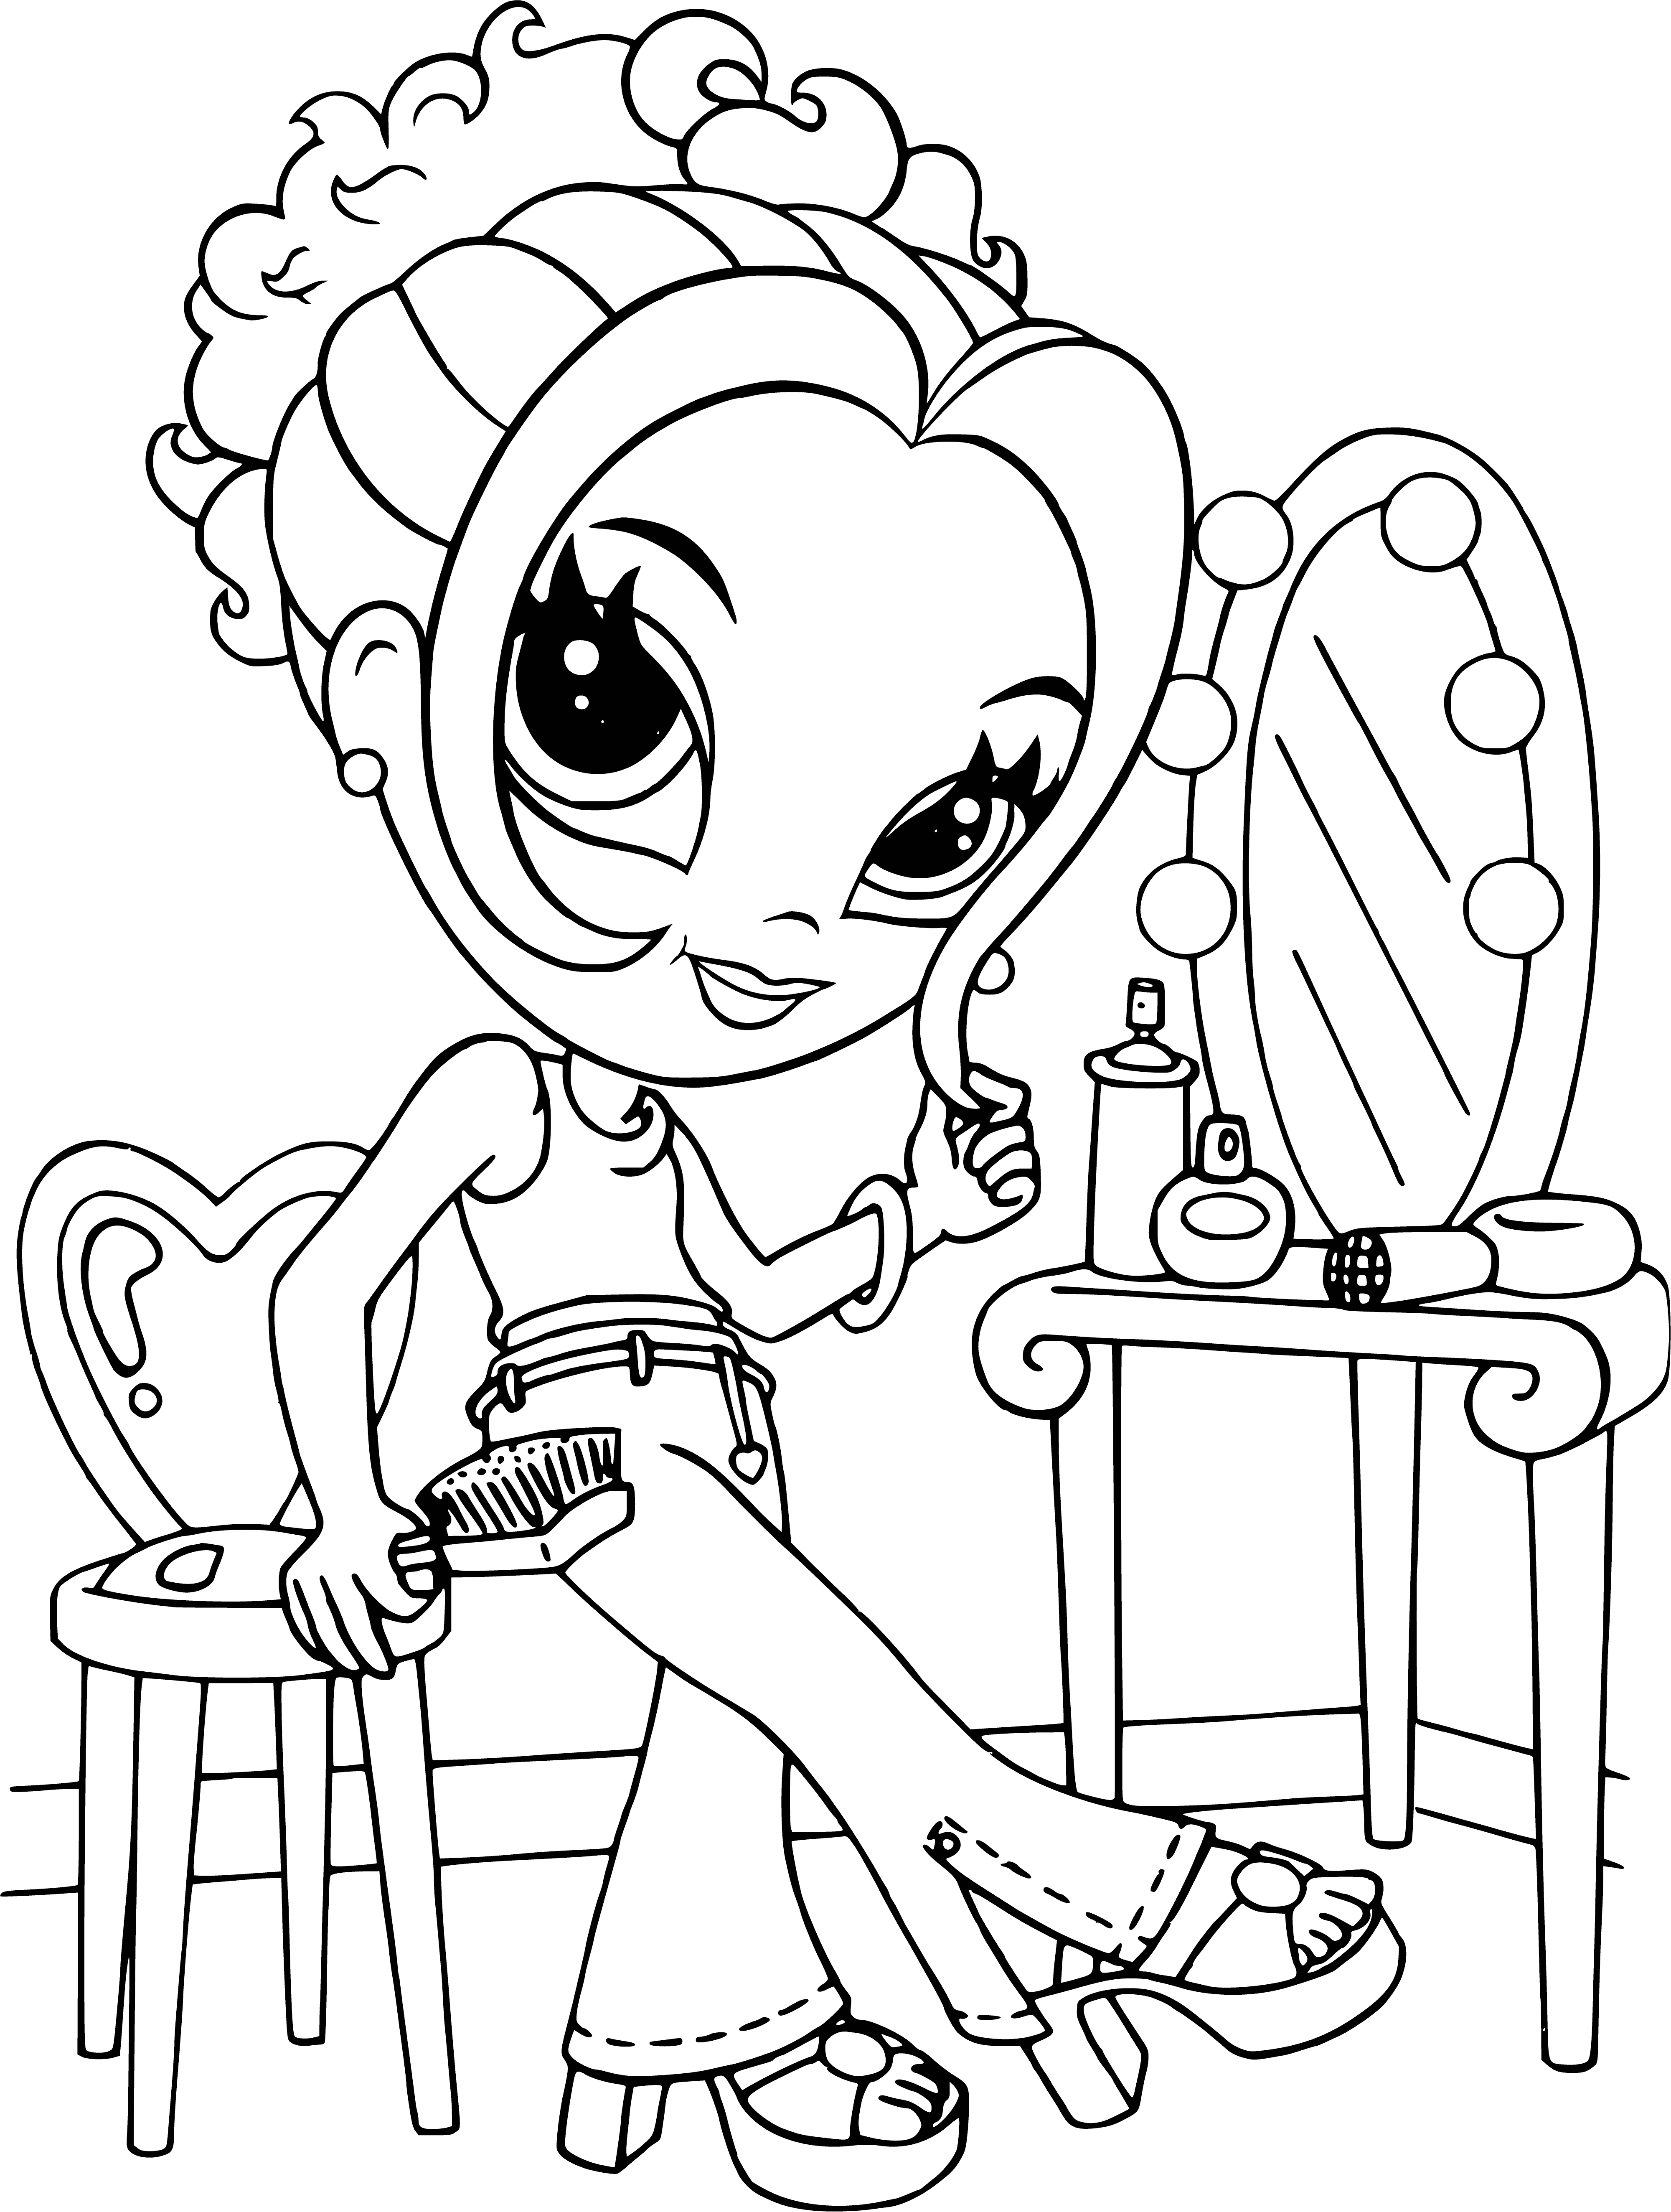 coloring page: Glamorous girl in pink dress, feather boa & pink hair standing on pink background - perfect coloring page! #coloringtime